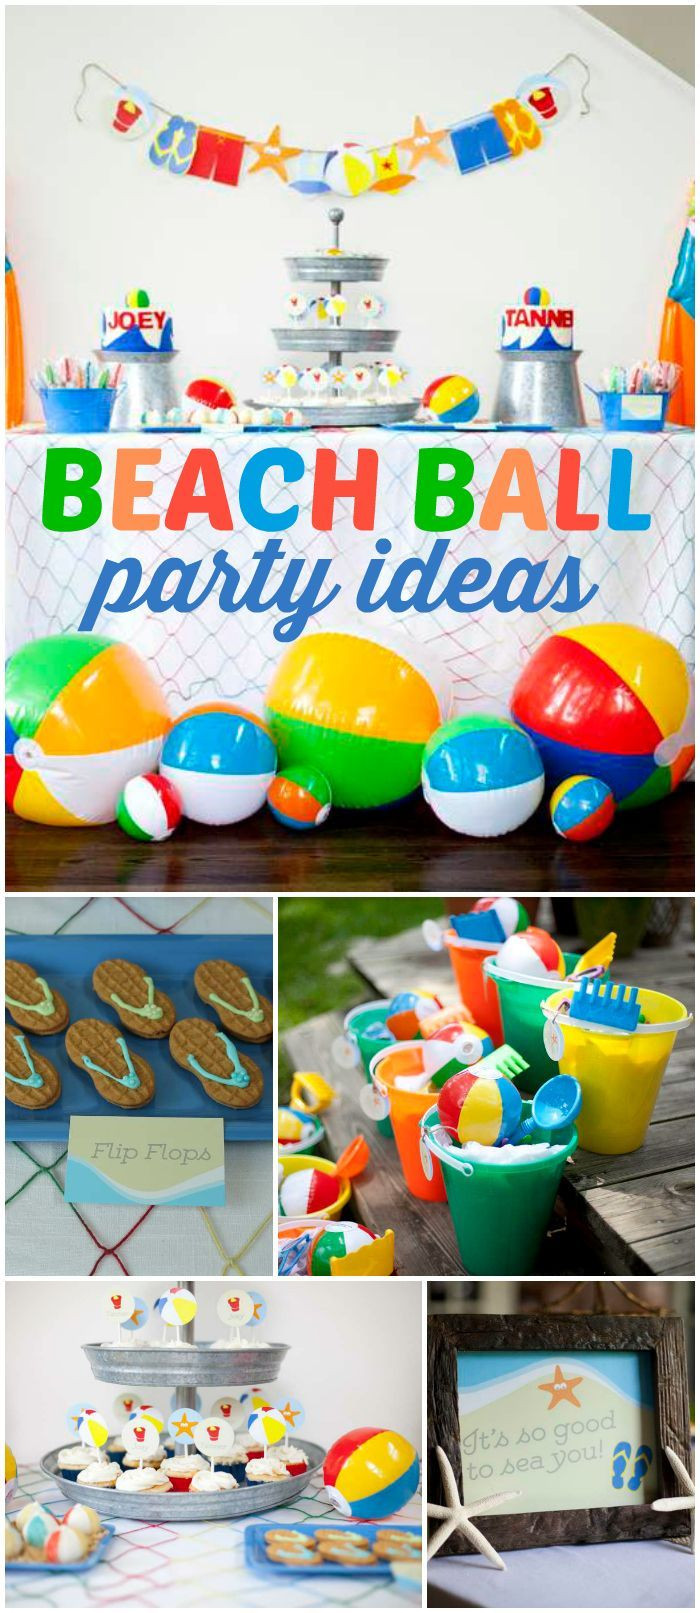 Pool Party Ideas For Boys
 Lots of colorful beach balls are at this fun party See